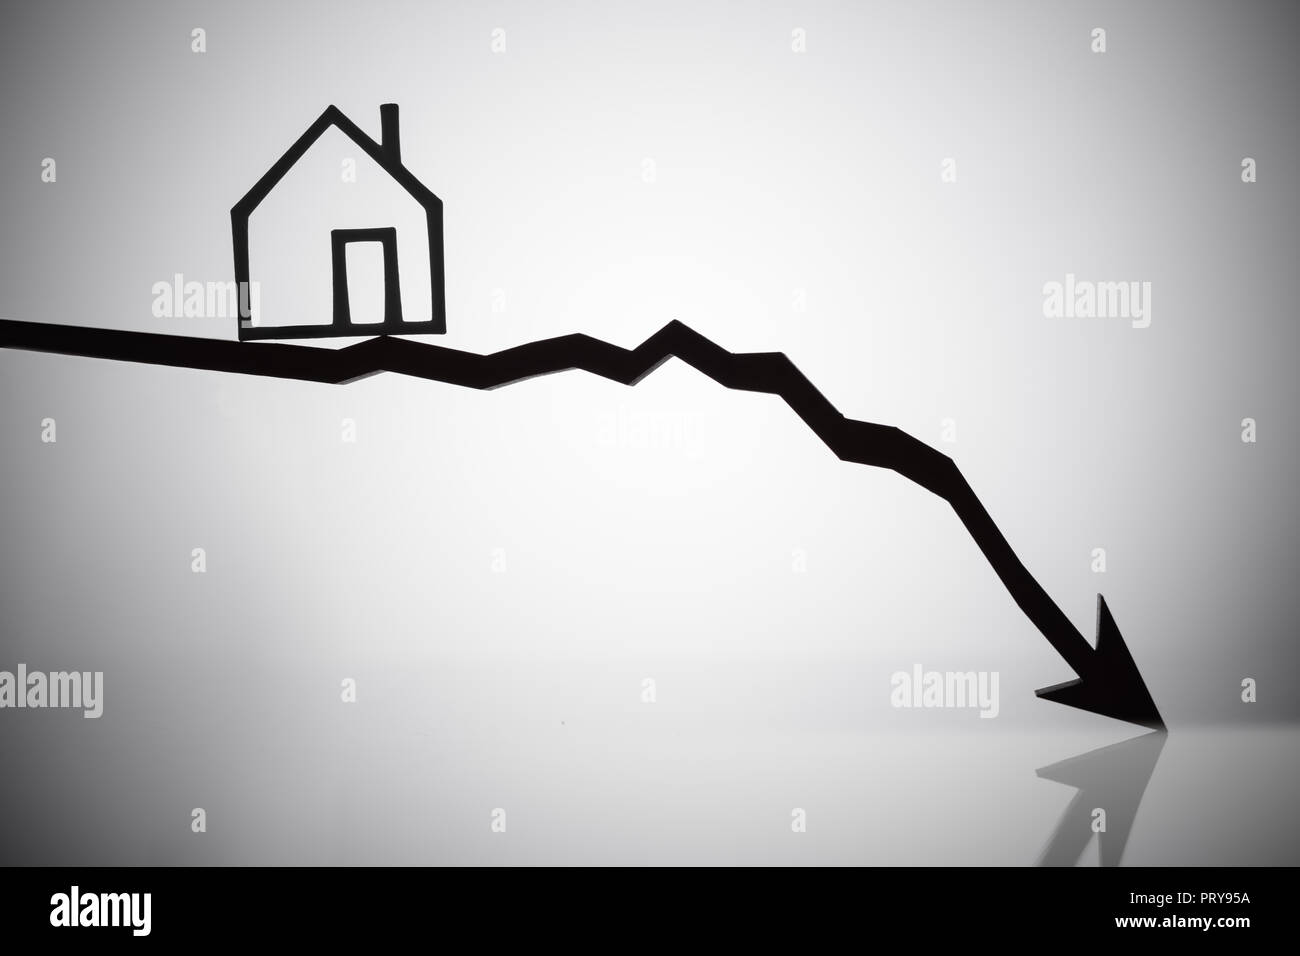 Outline Of A House On Arrow Moving In Downward Direction On Reflective Background Stock Photo